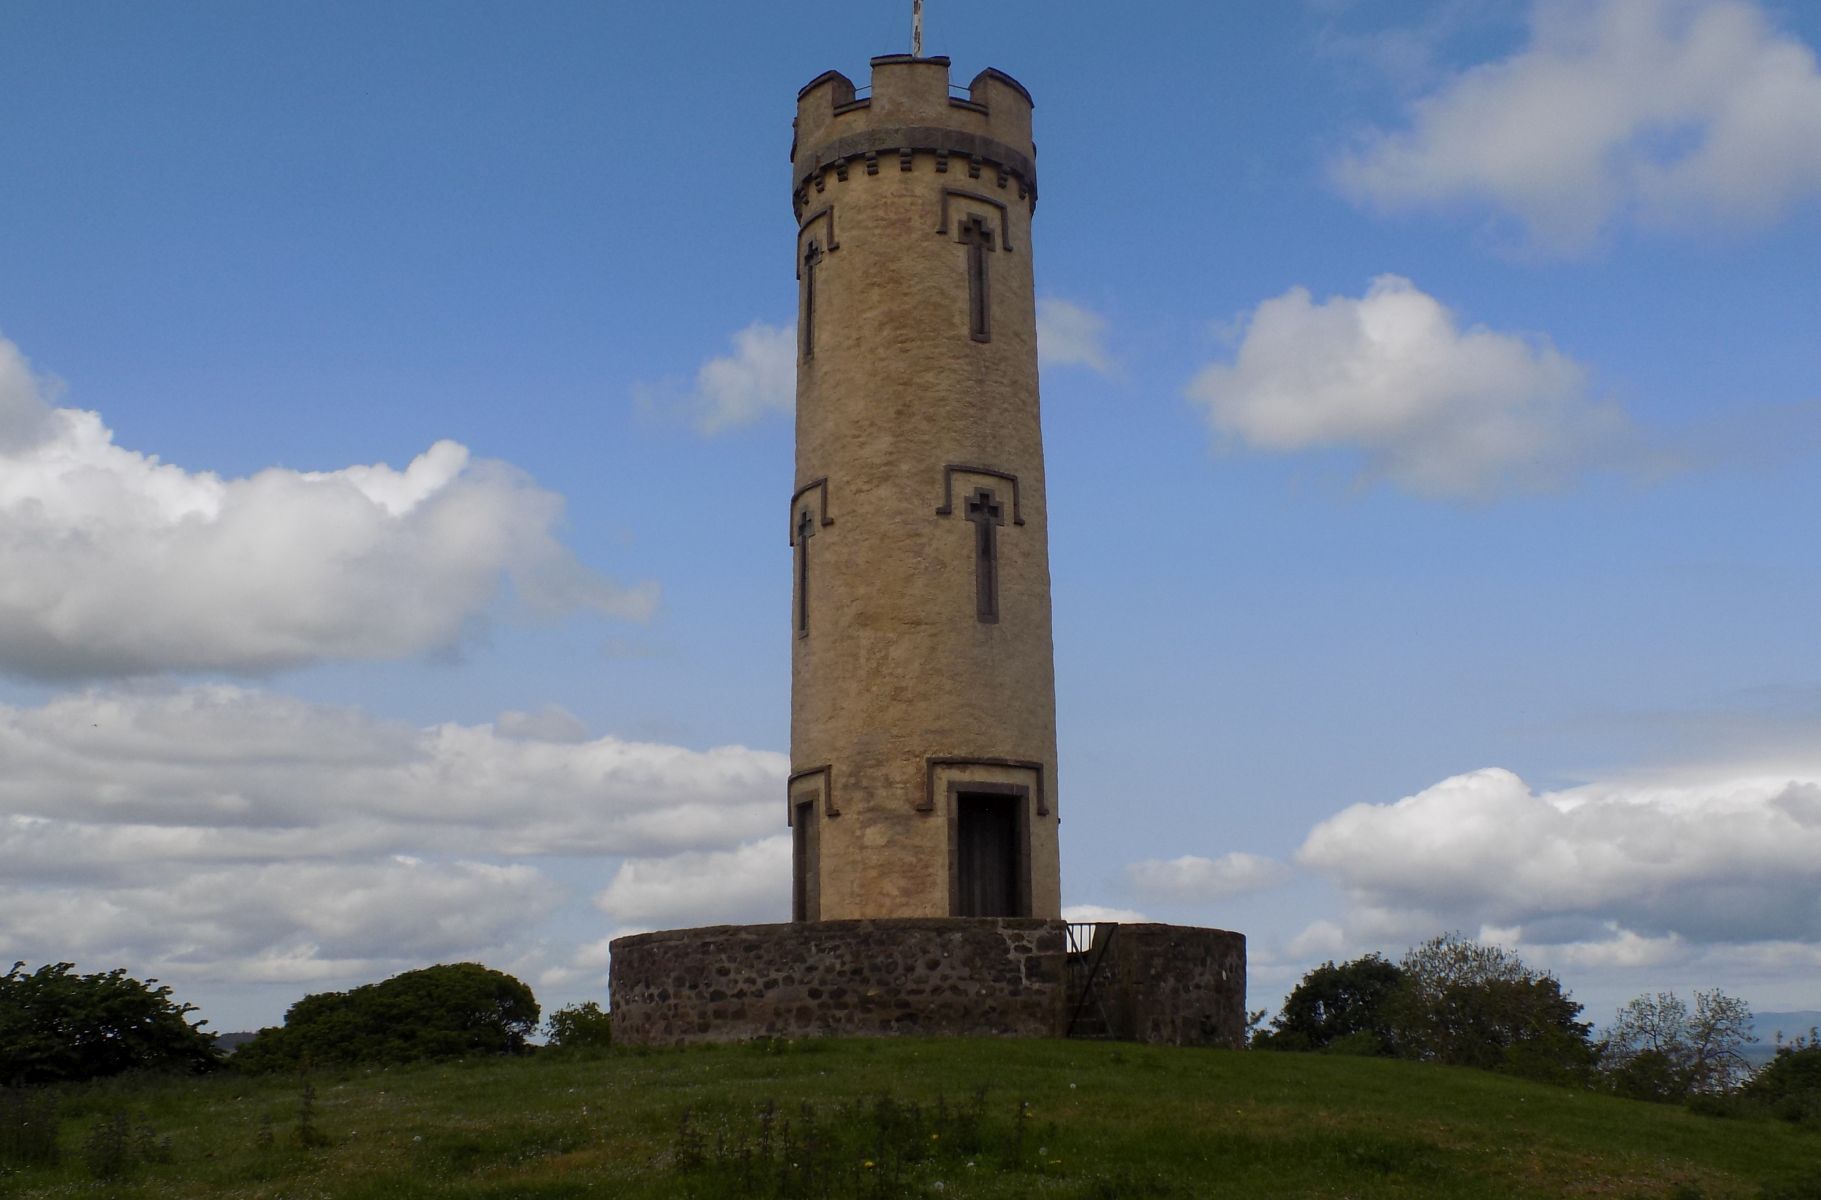 The Tower at House of the Binns